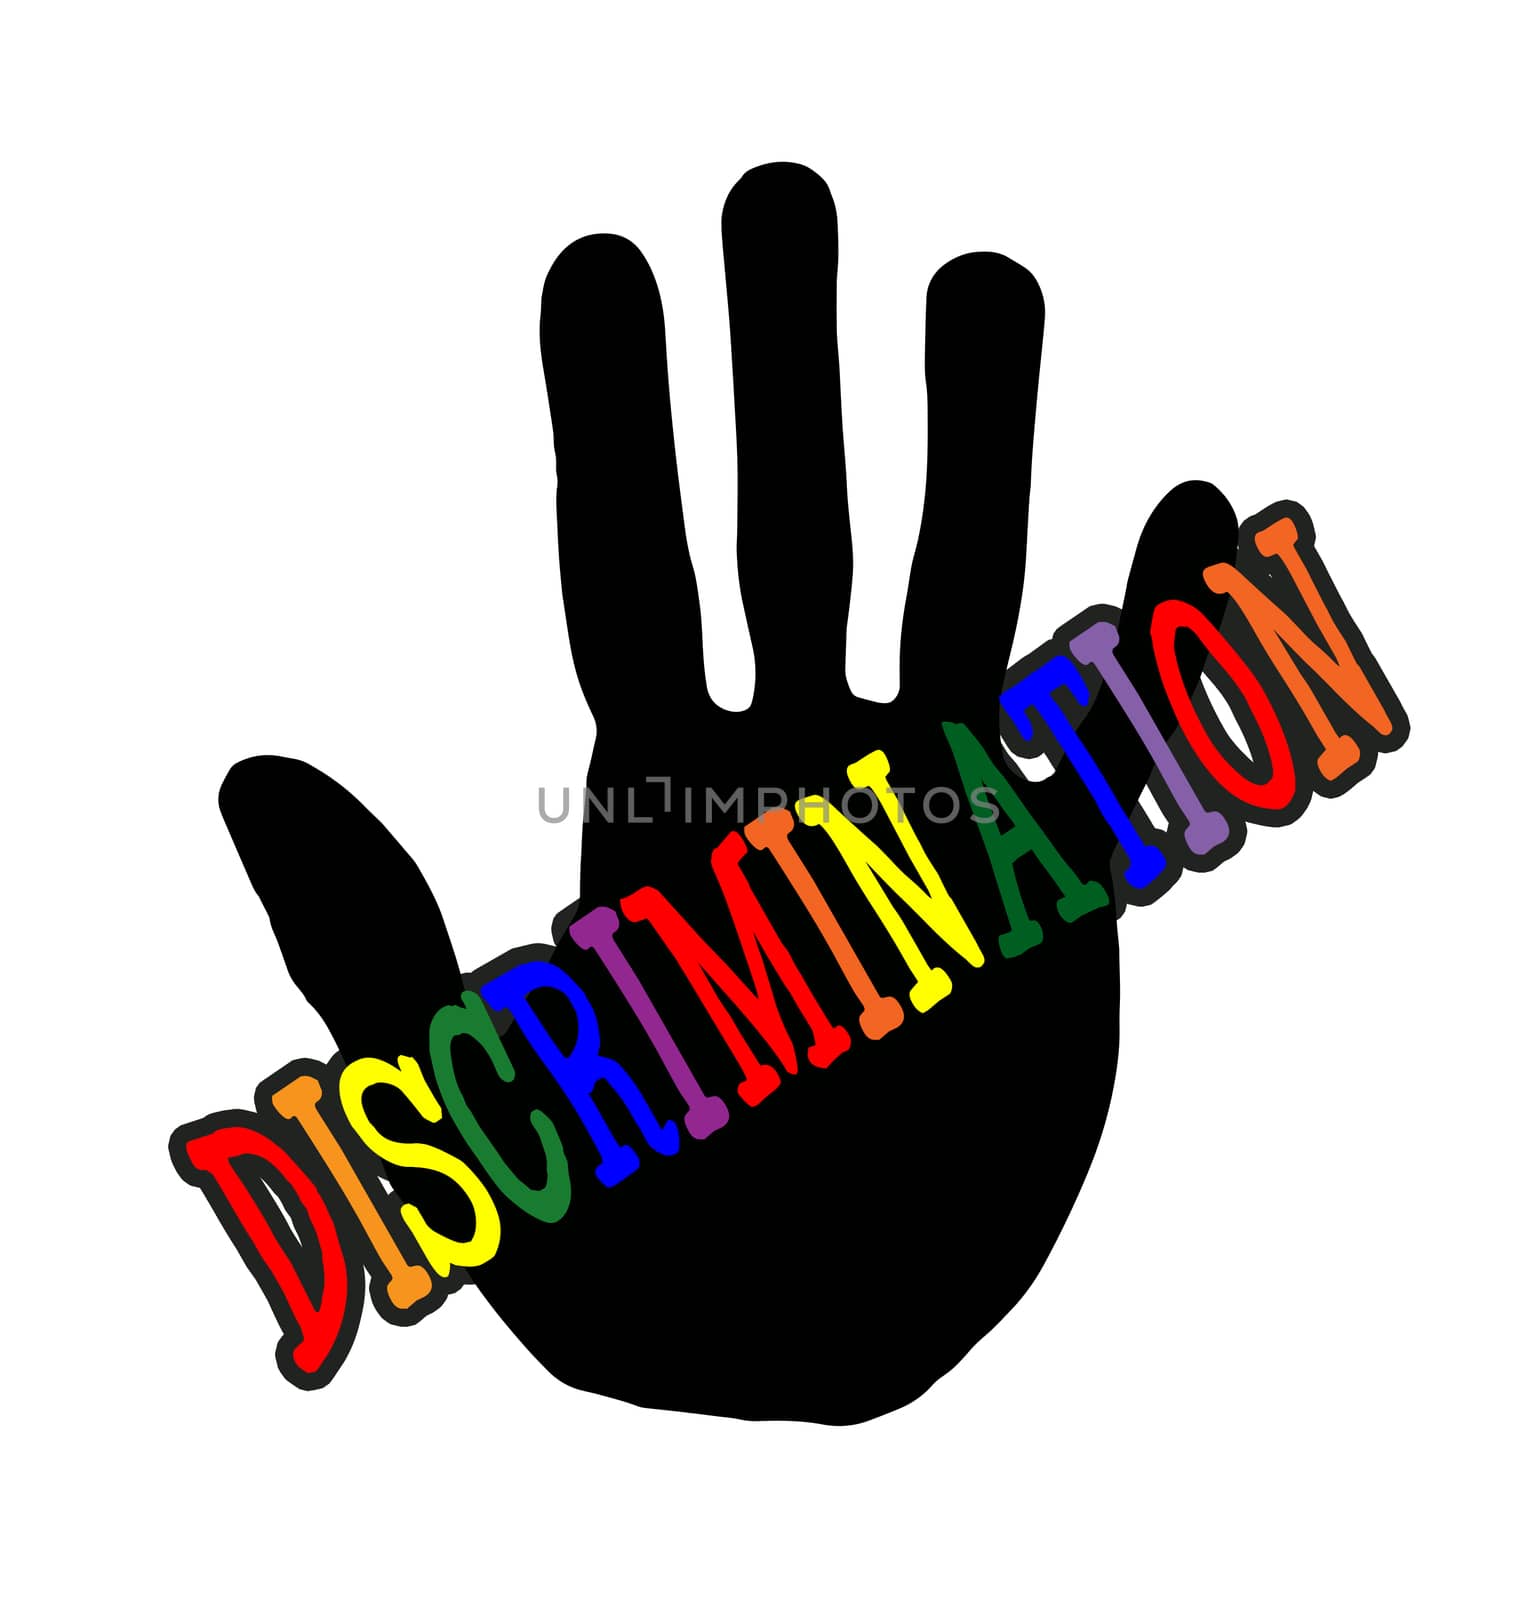 Man handprint isolated on white background showing stop discrimination